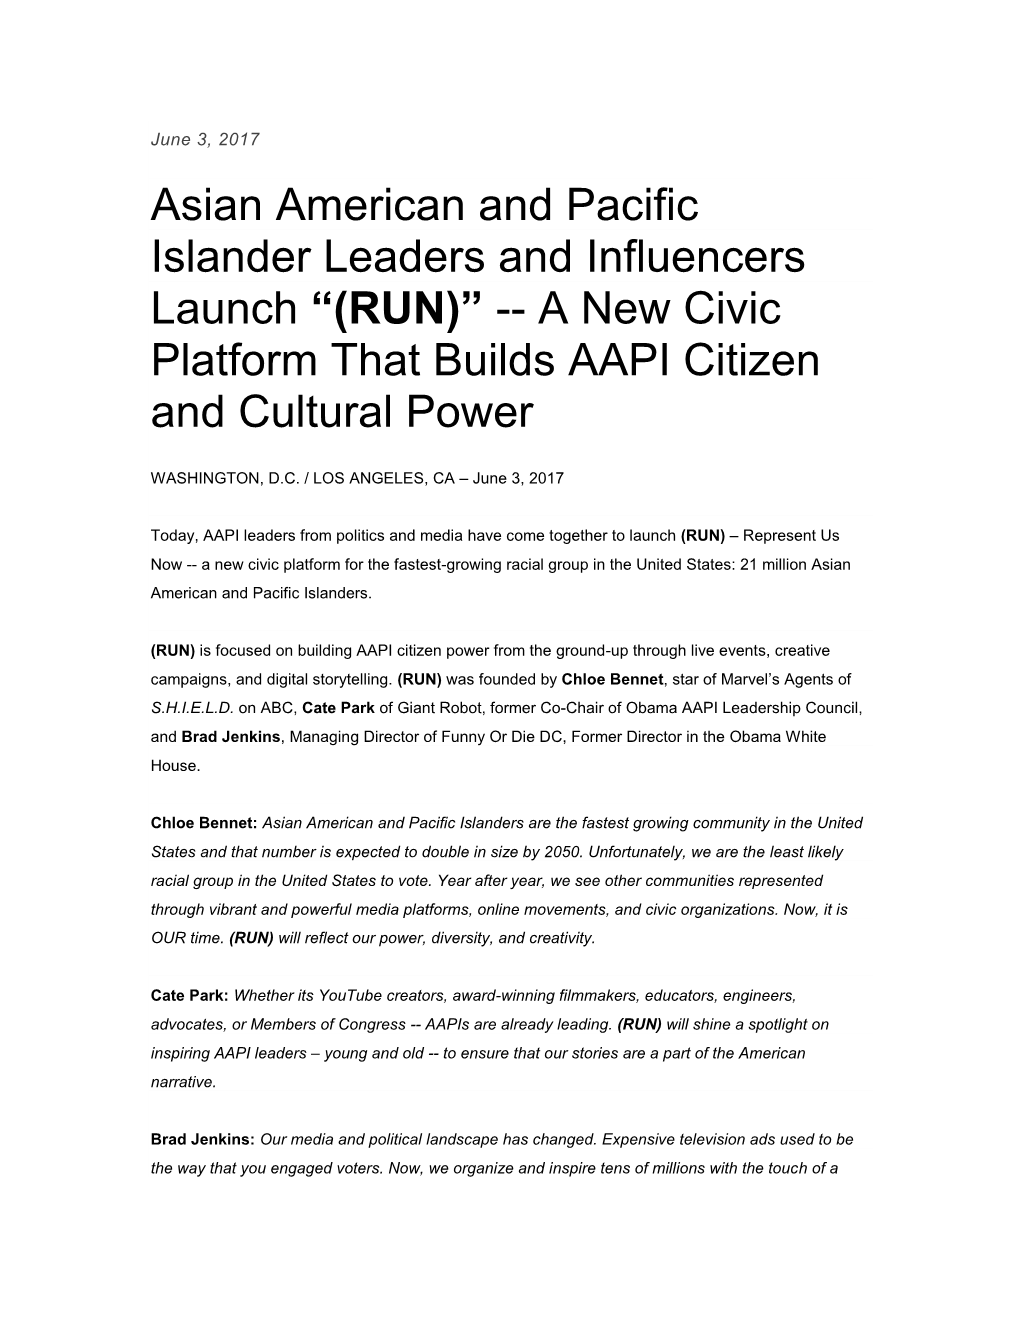 Asian American and Pacific Islander Leaders and Influencers Launch “(RUN)” -- a New Civic Platform That Builds AAPI Citizen and Cultural Power